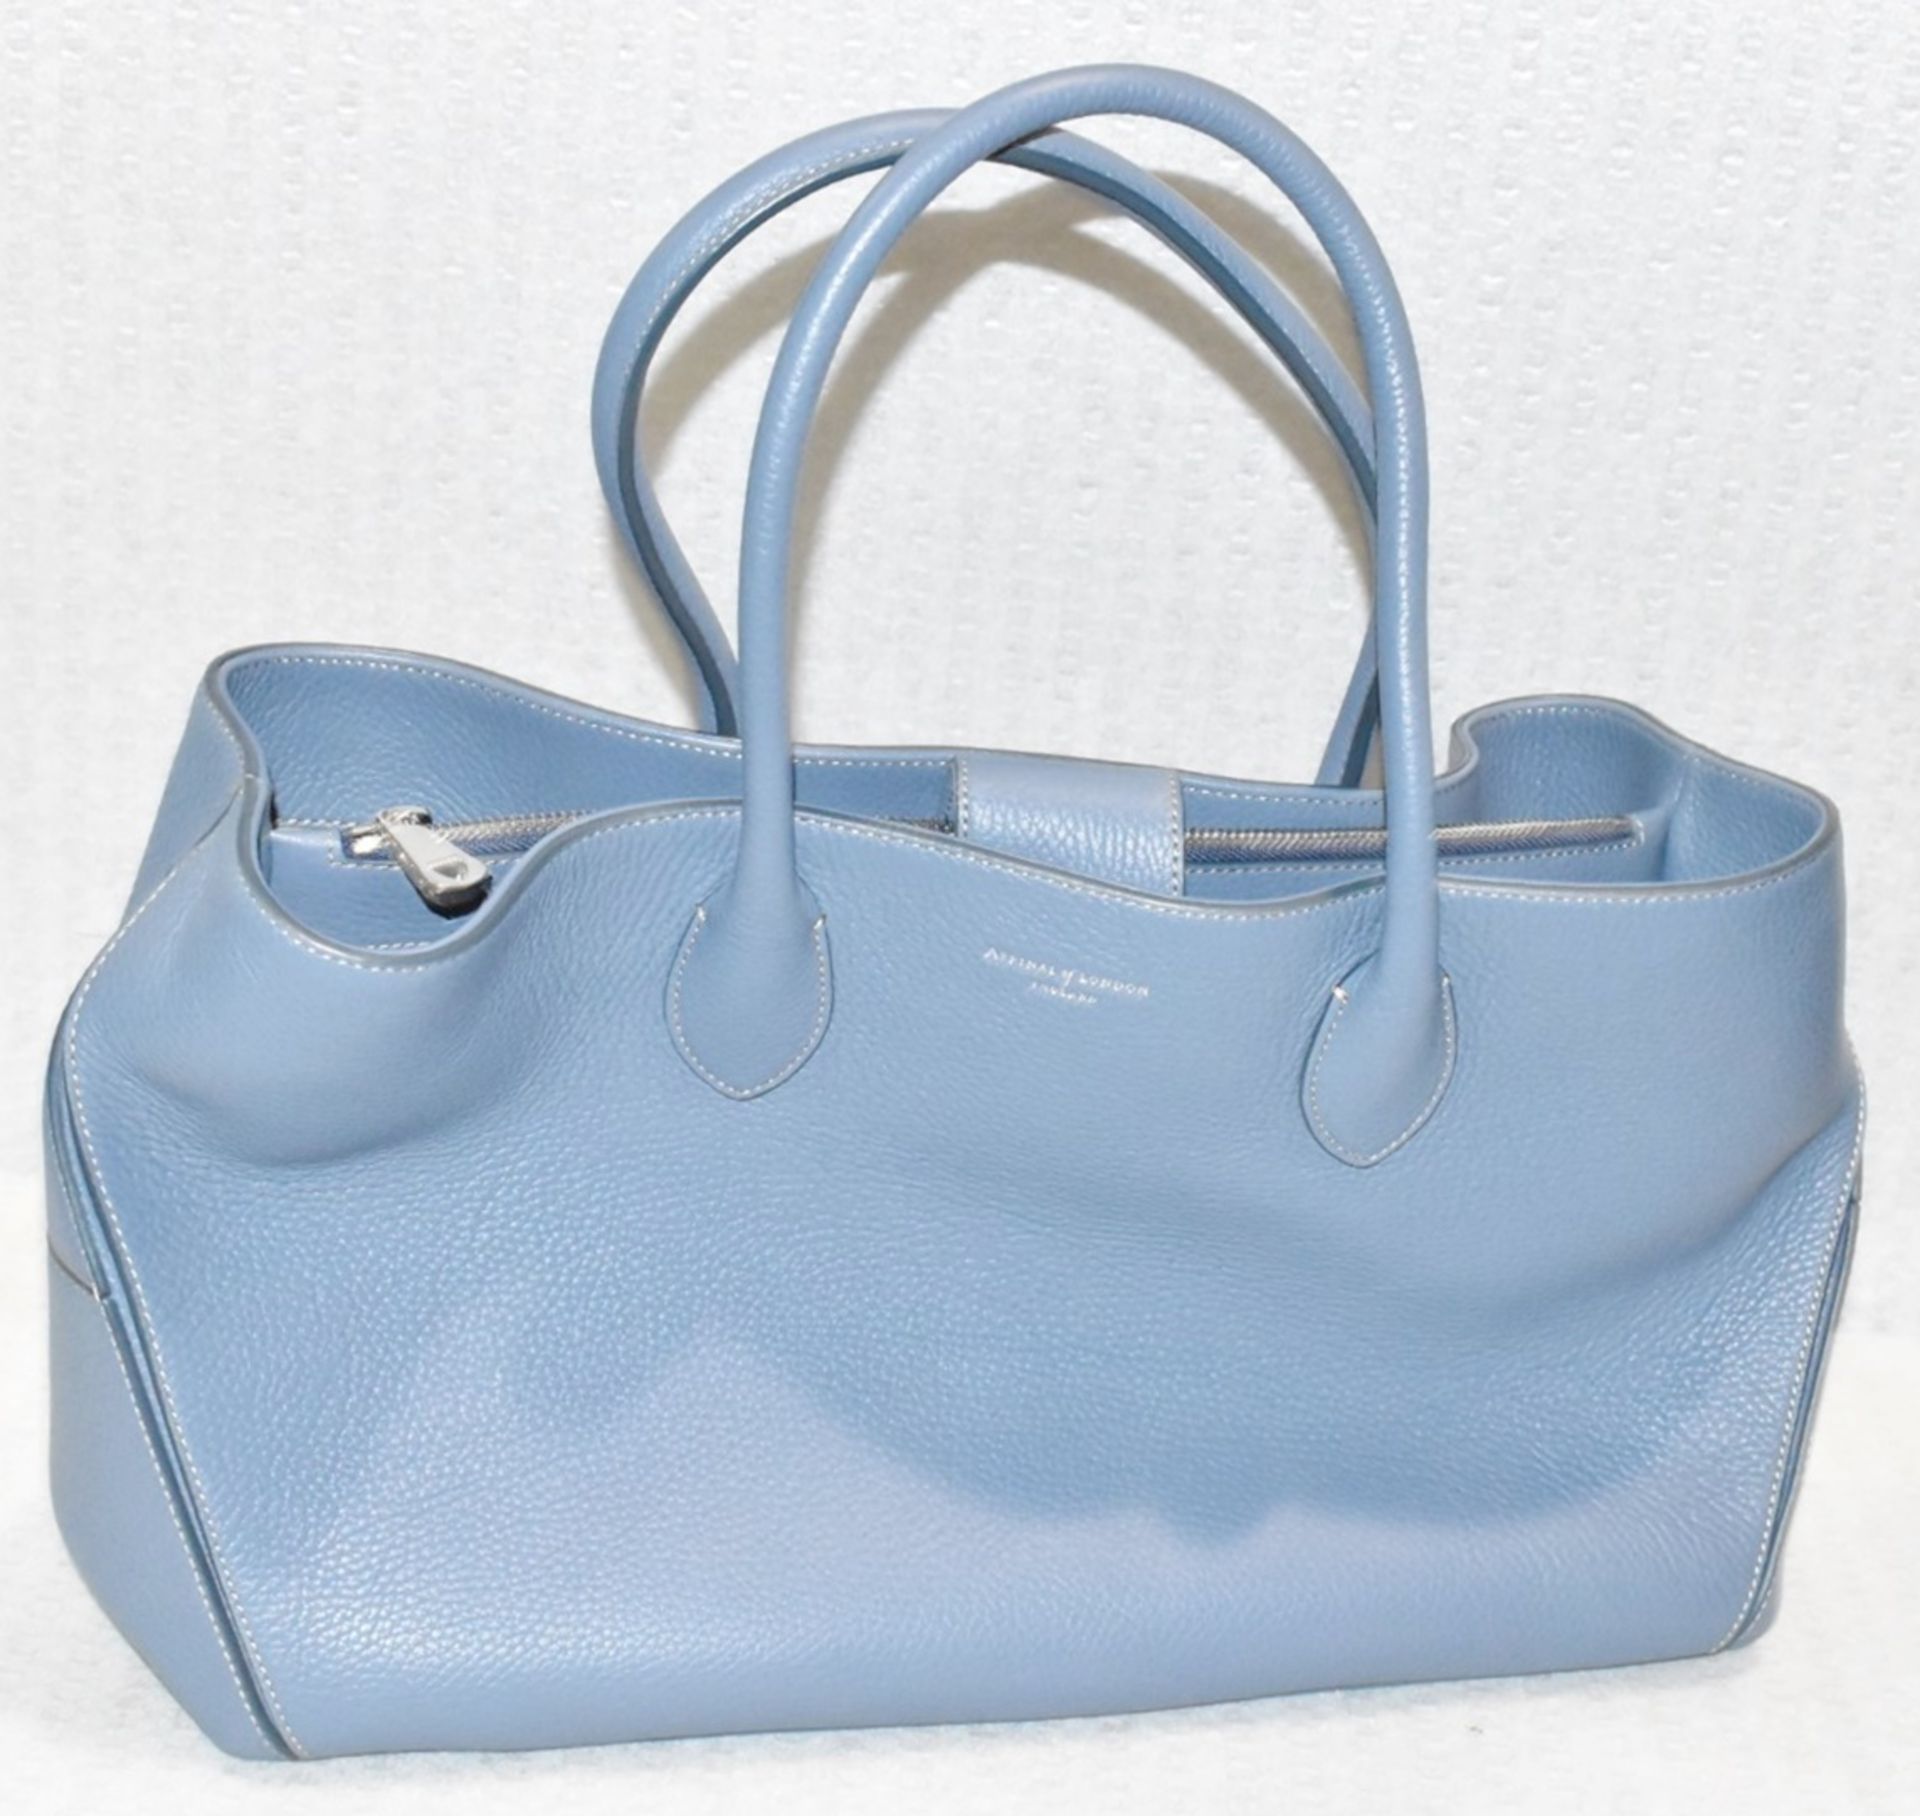 1 x ASPINAL OF LONDON Luxury Leather Tote Bag In Pale Blue - Original Price £675.00 - Image 2 of 6